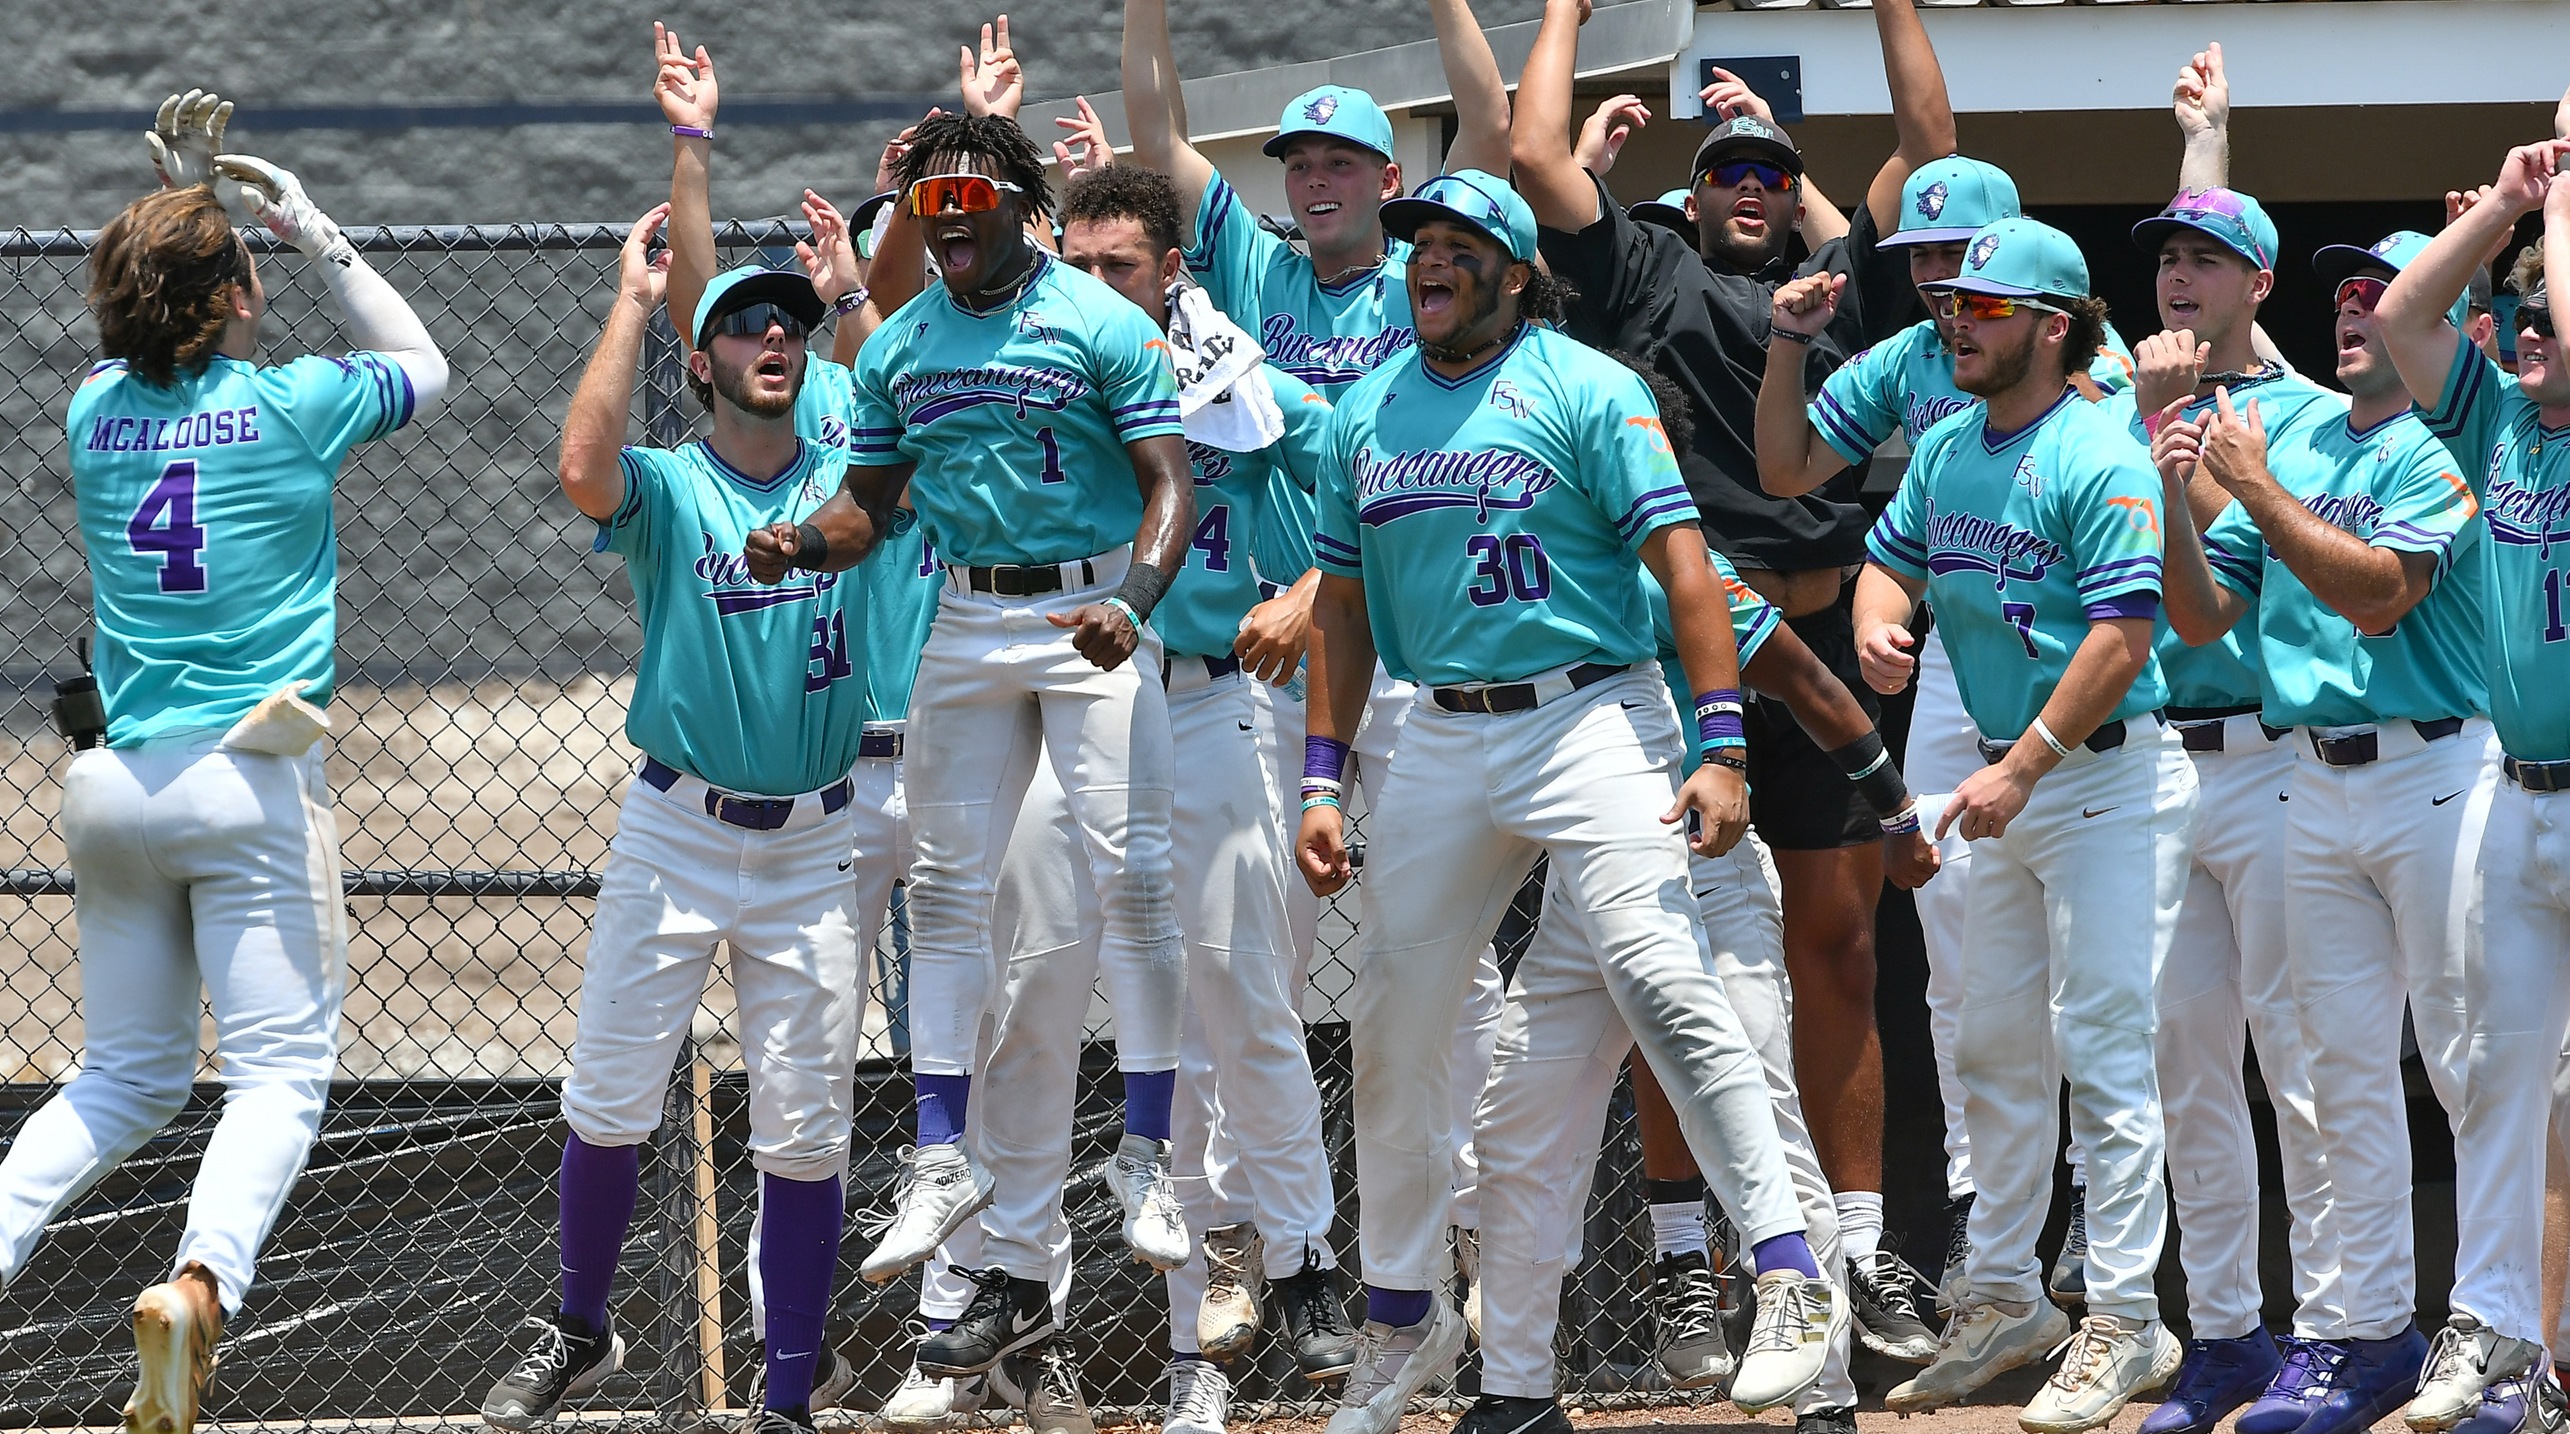 The Bucs celebrate Michael McAloose's 2nd inning home run (Photo by Tom Hagerty)